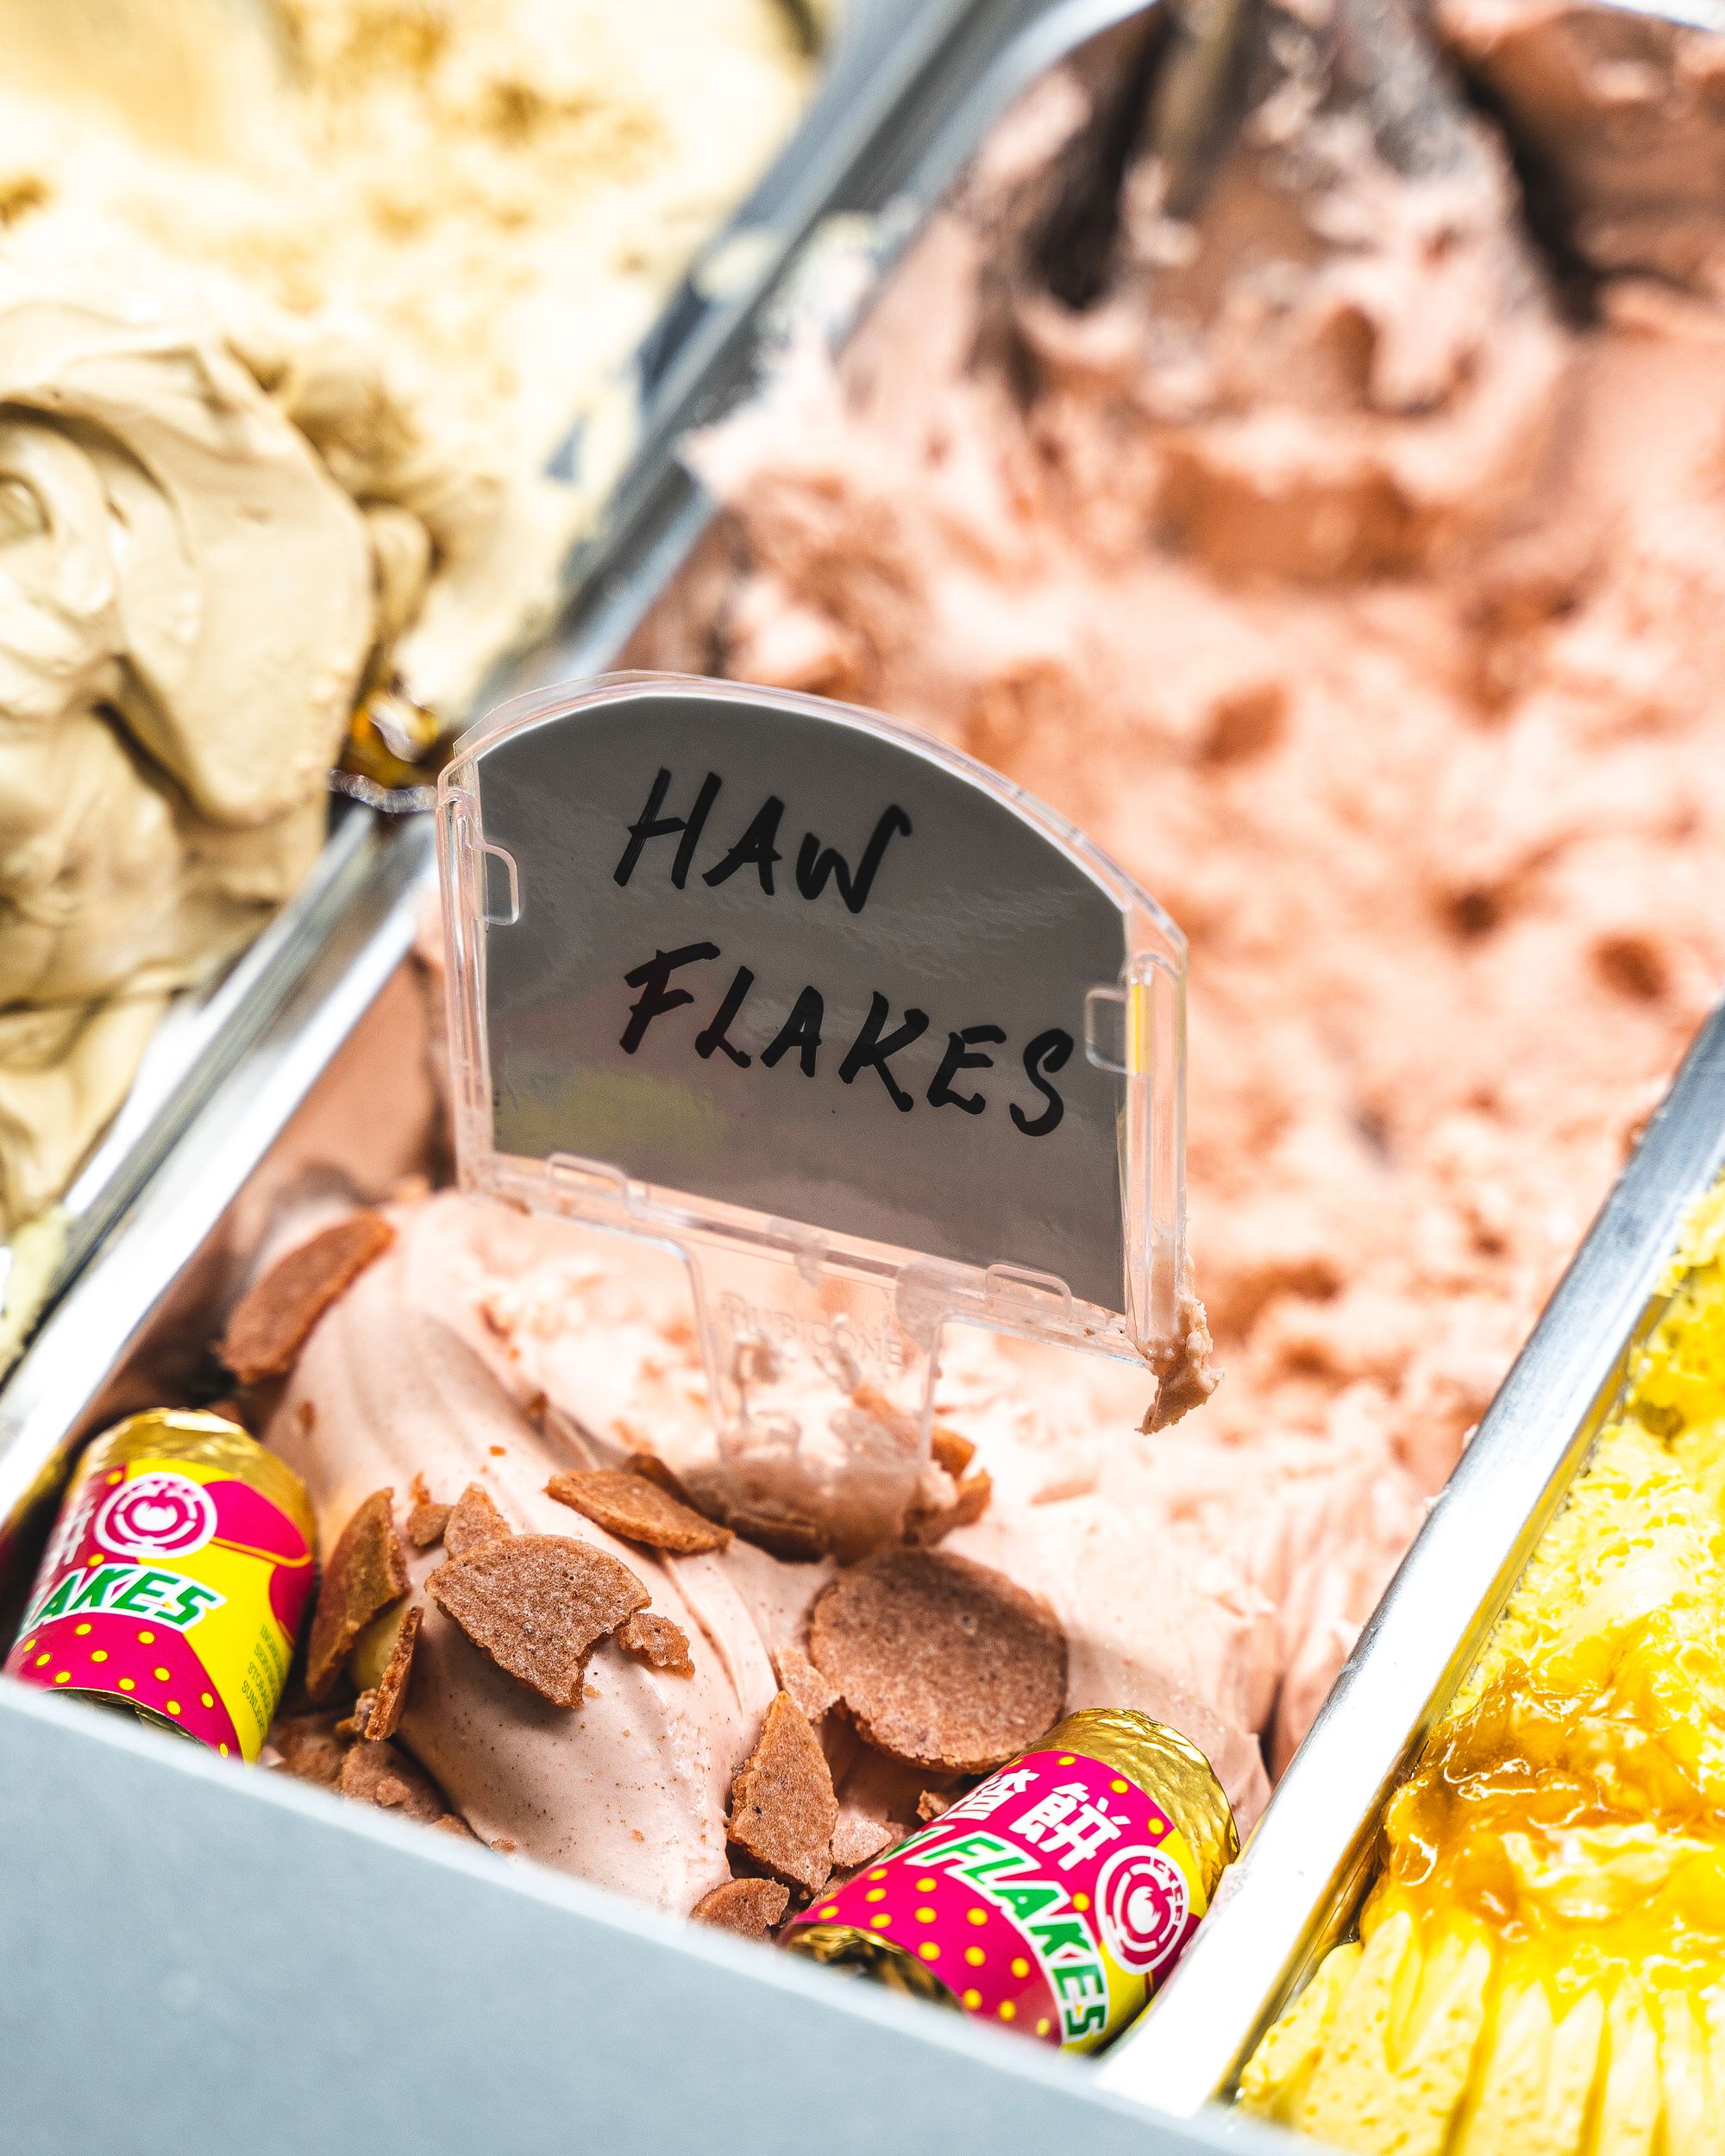 Close up of haw flakes gelato